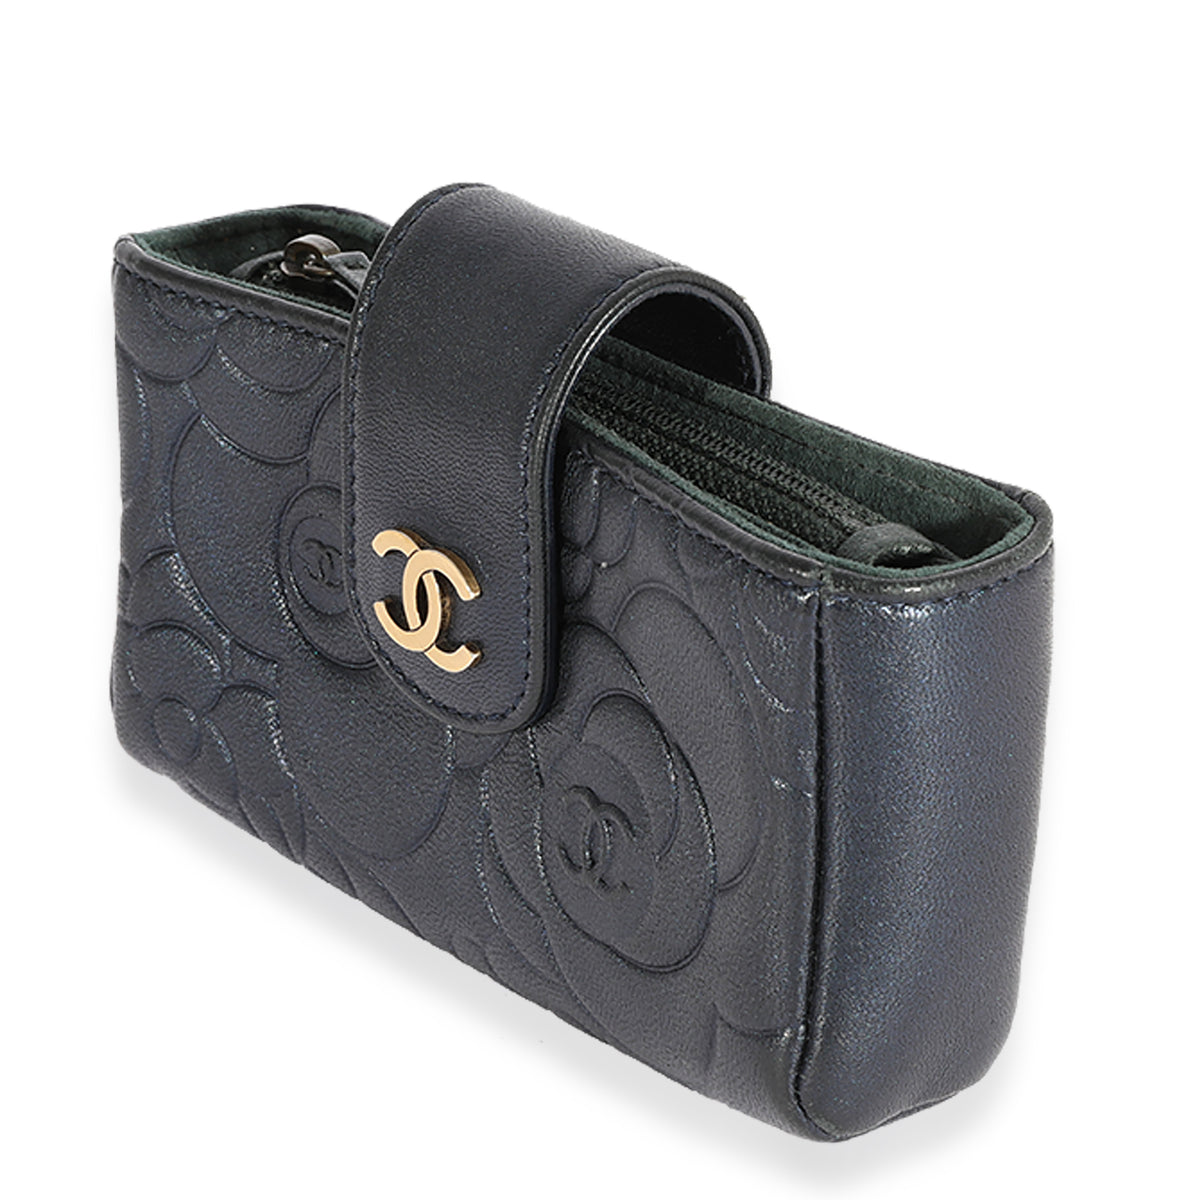 CHANEL Quilted Leather Camellia Phone Messenger Bag Black